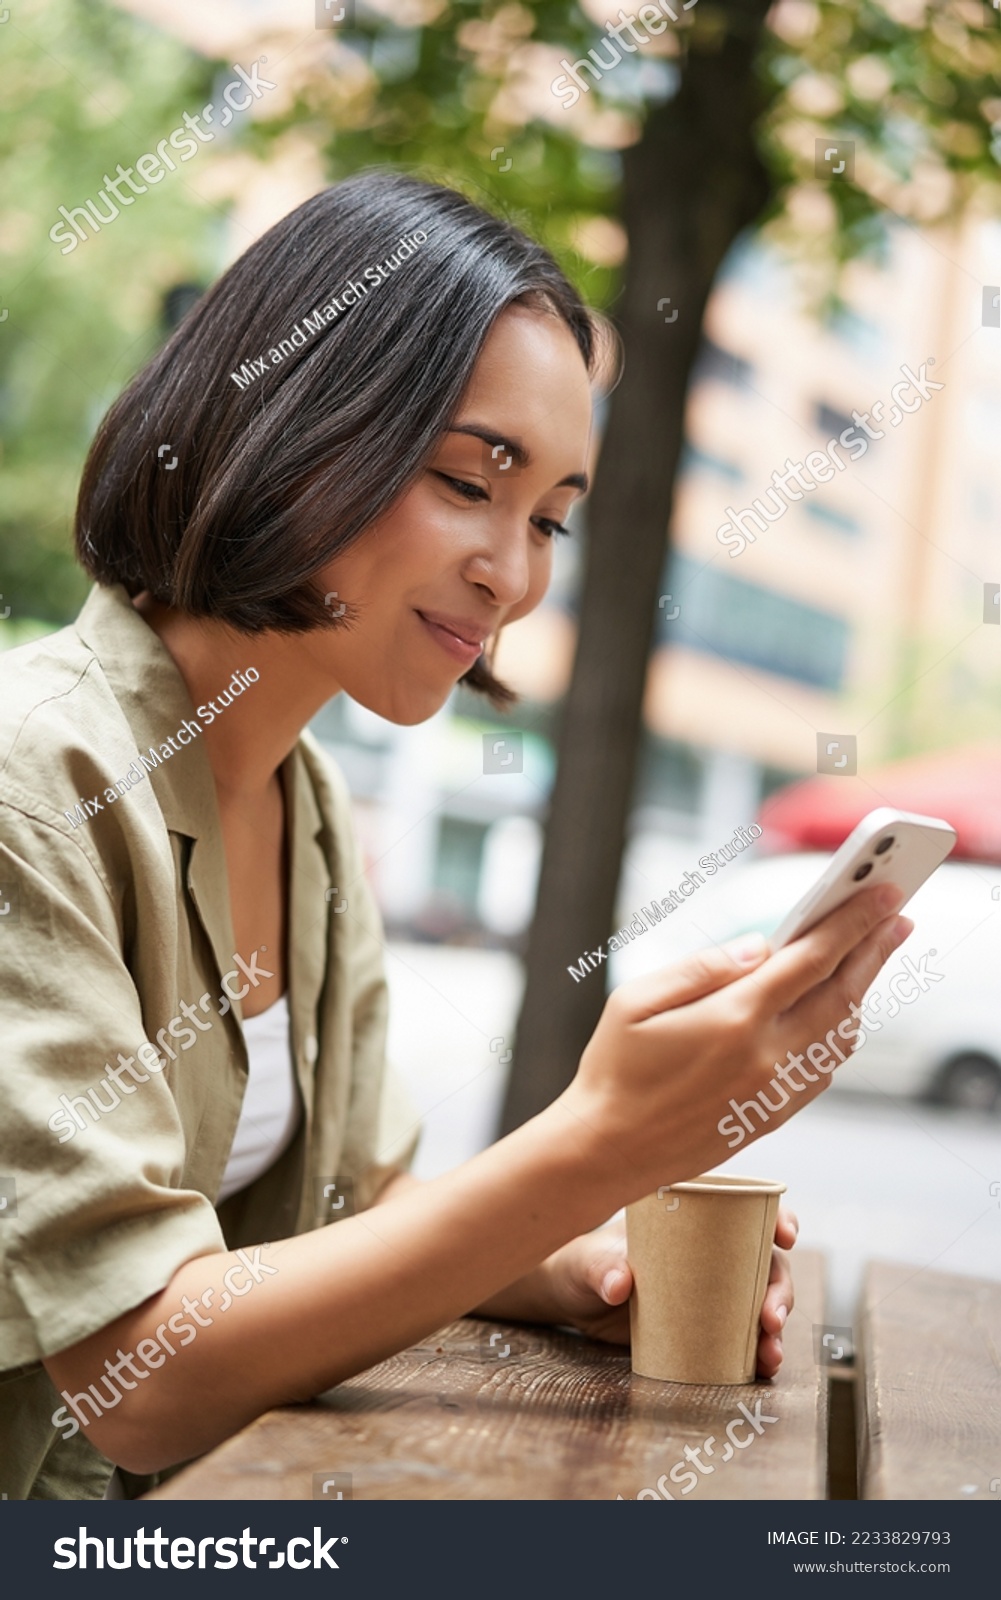 Close up portrait of asian girl sitting in cafe outside, drinking coffee and using smartphone, reading mobile phone. #2233829793